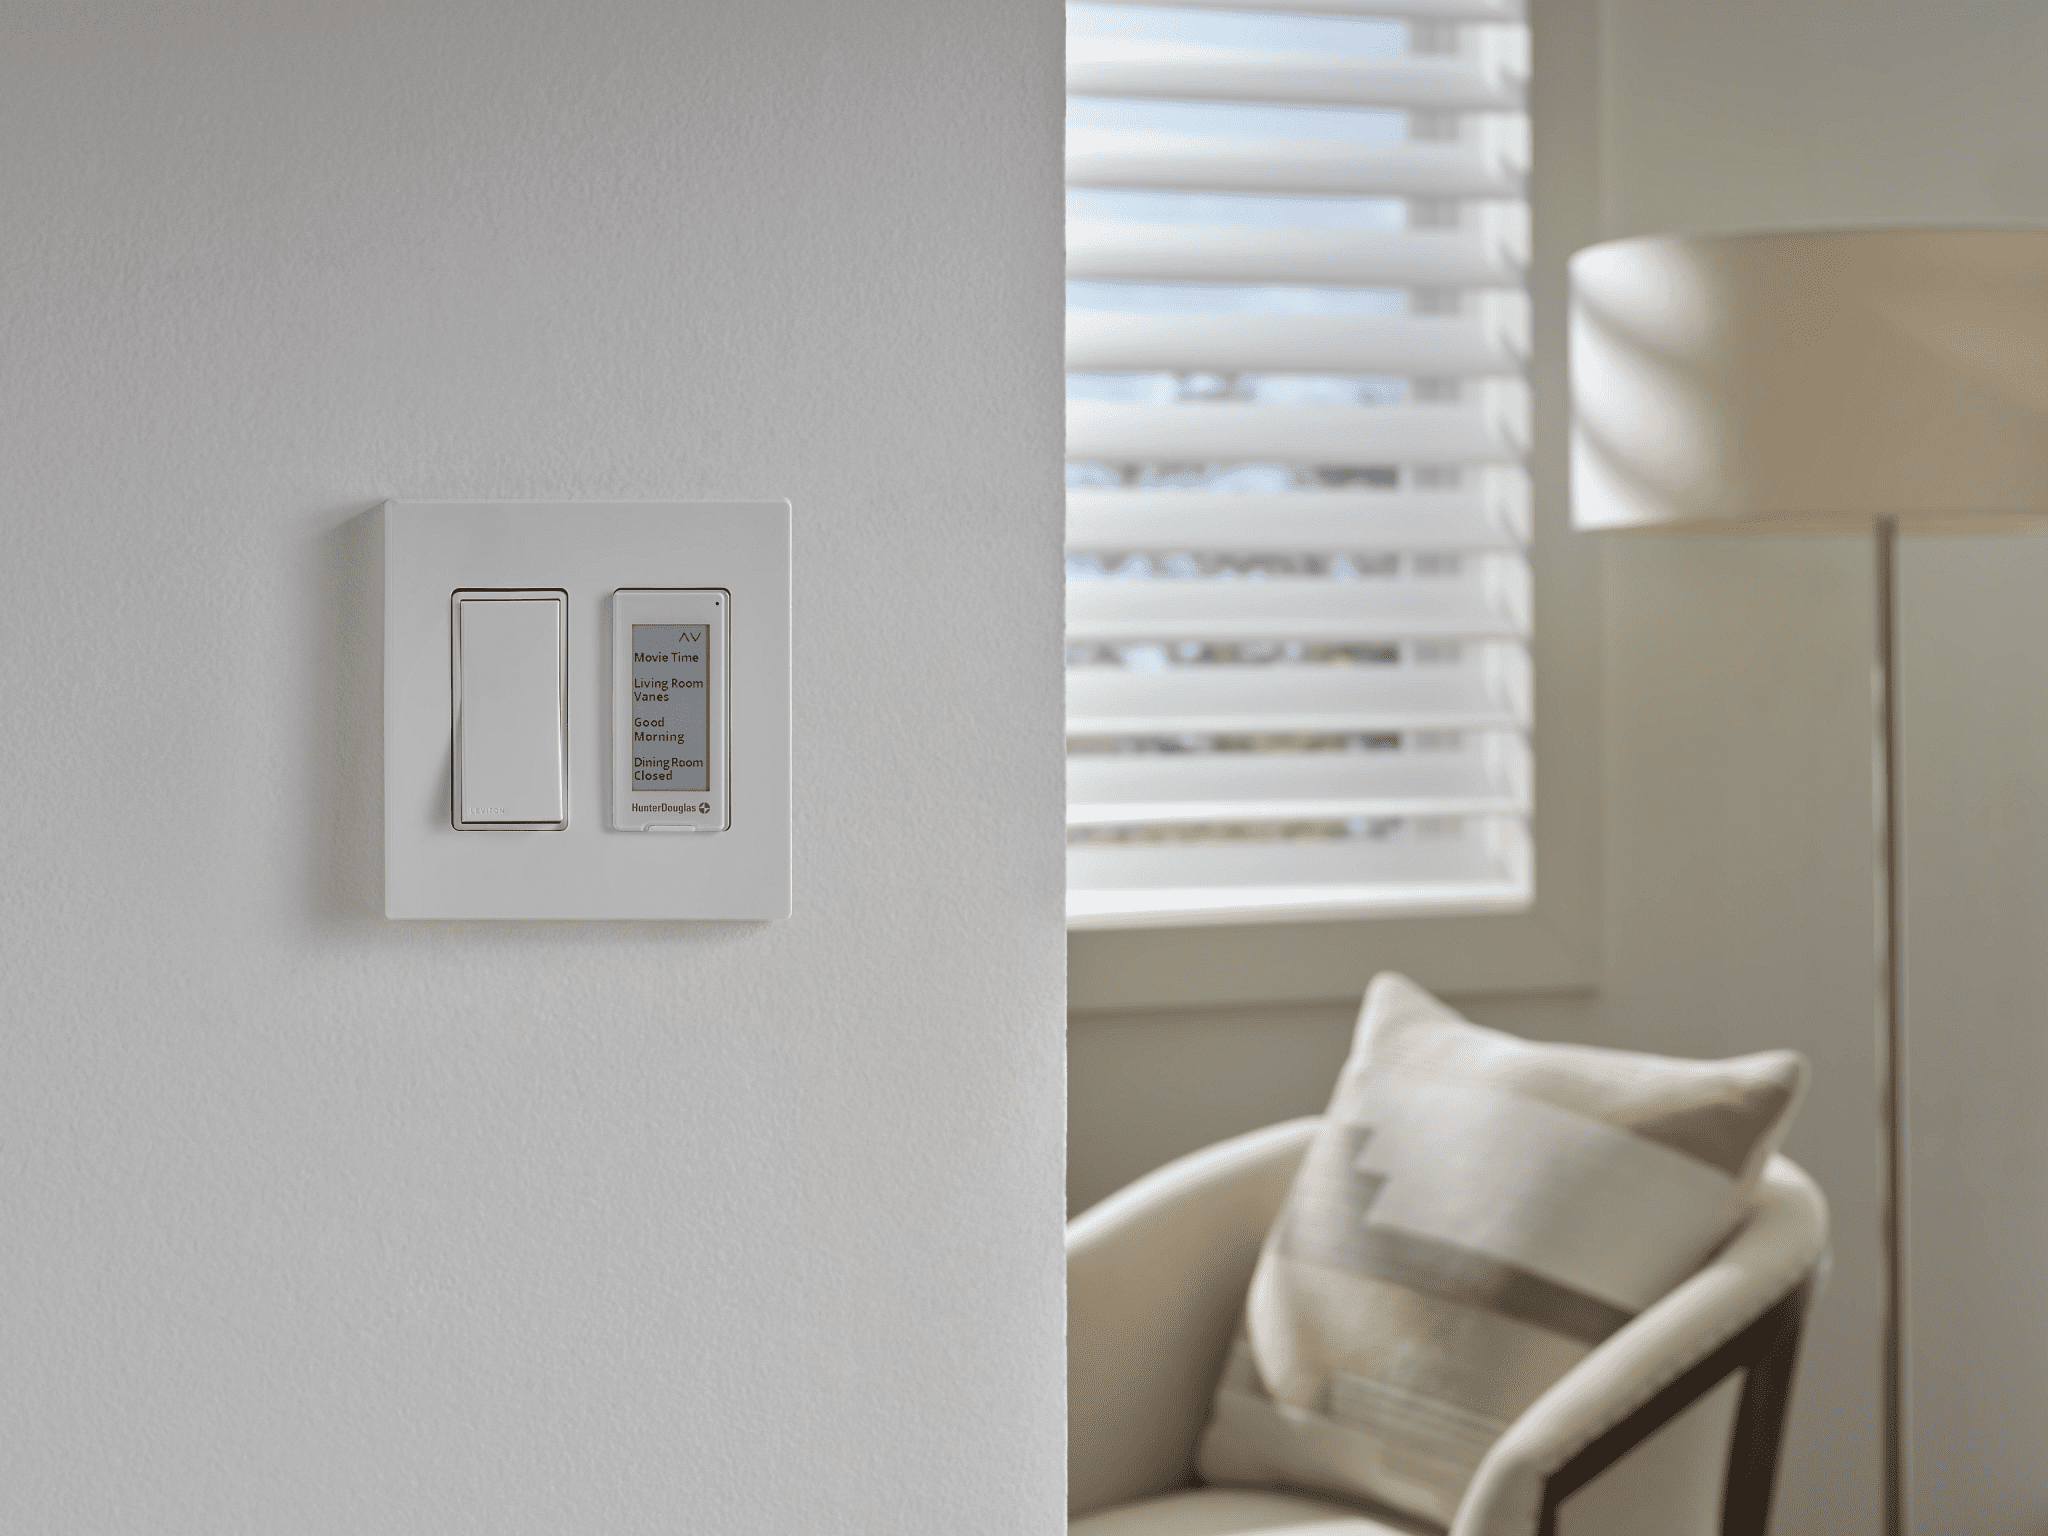 Wall switch for automatic shades